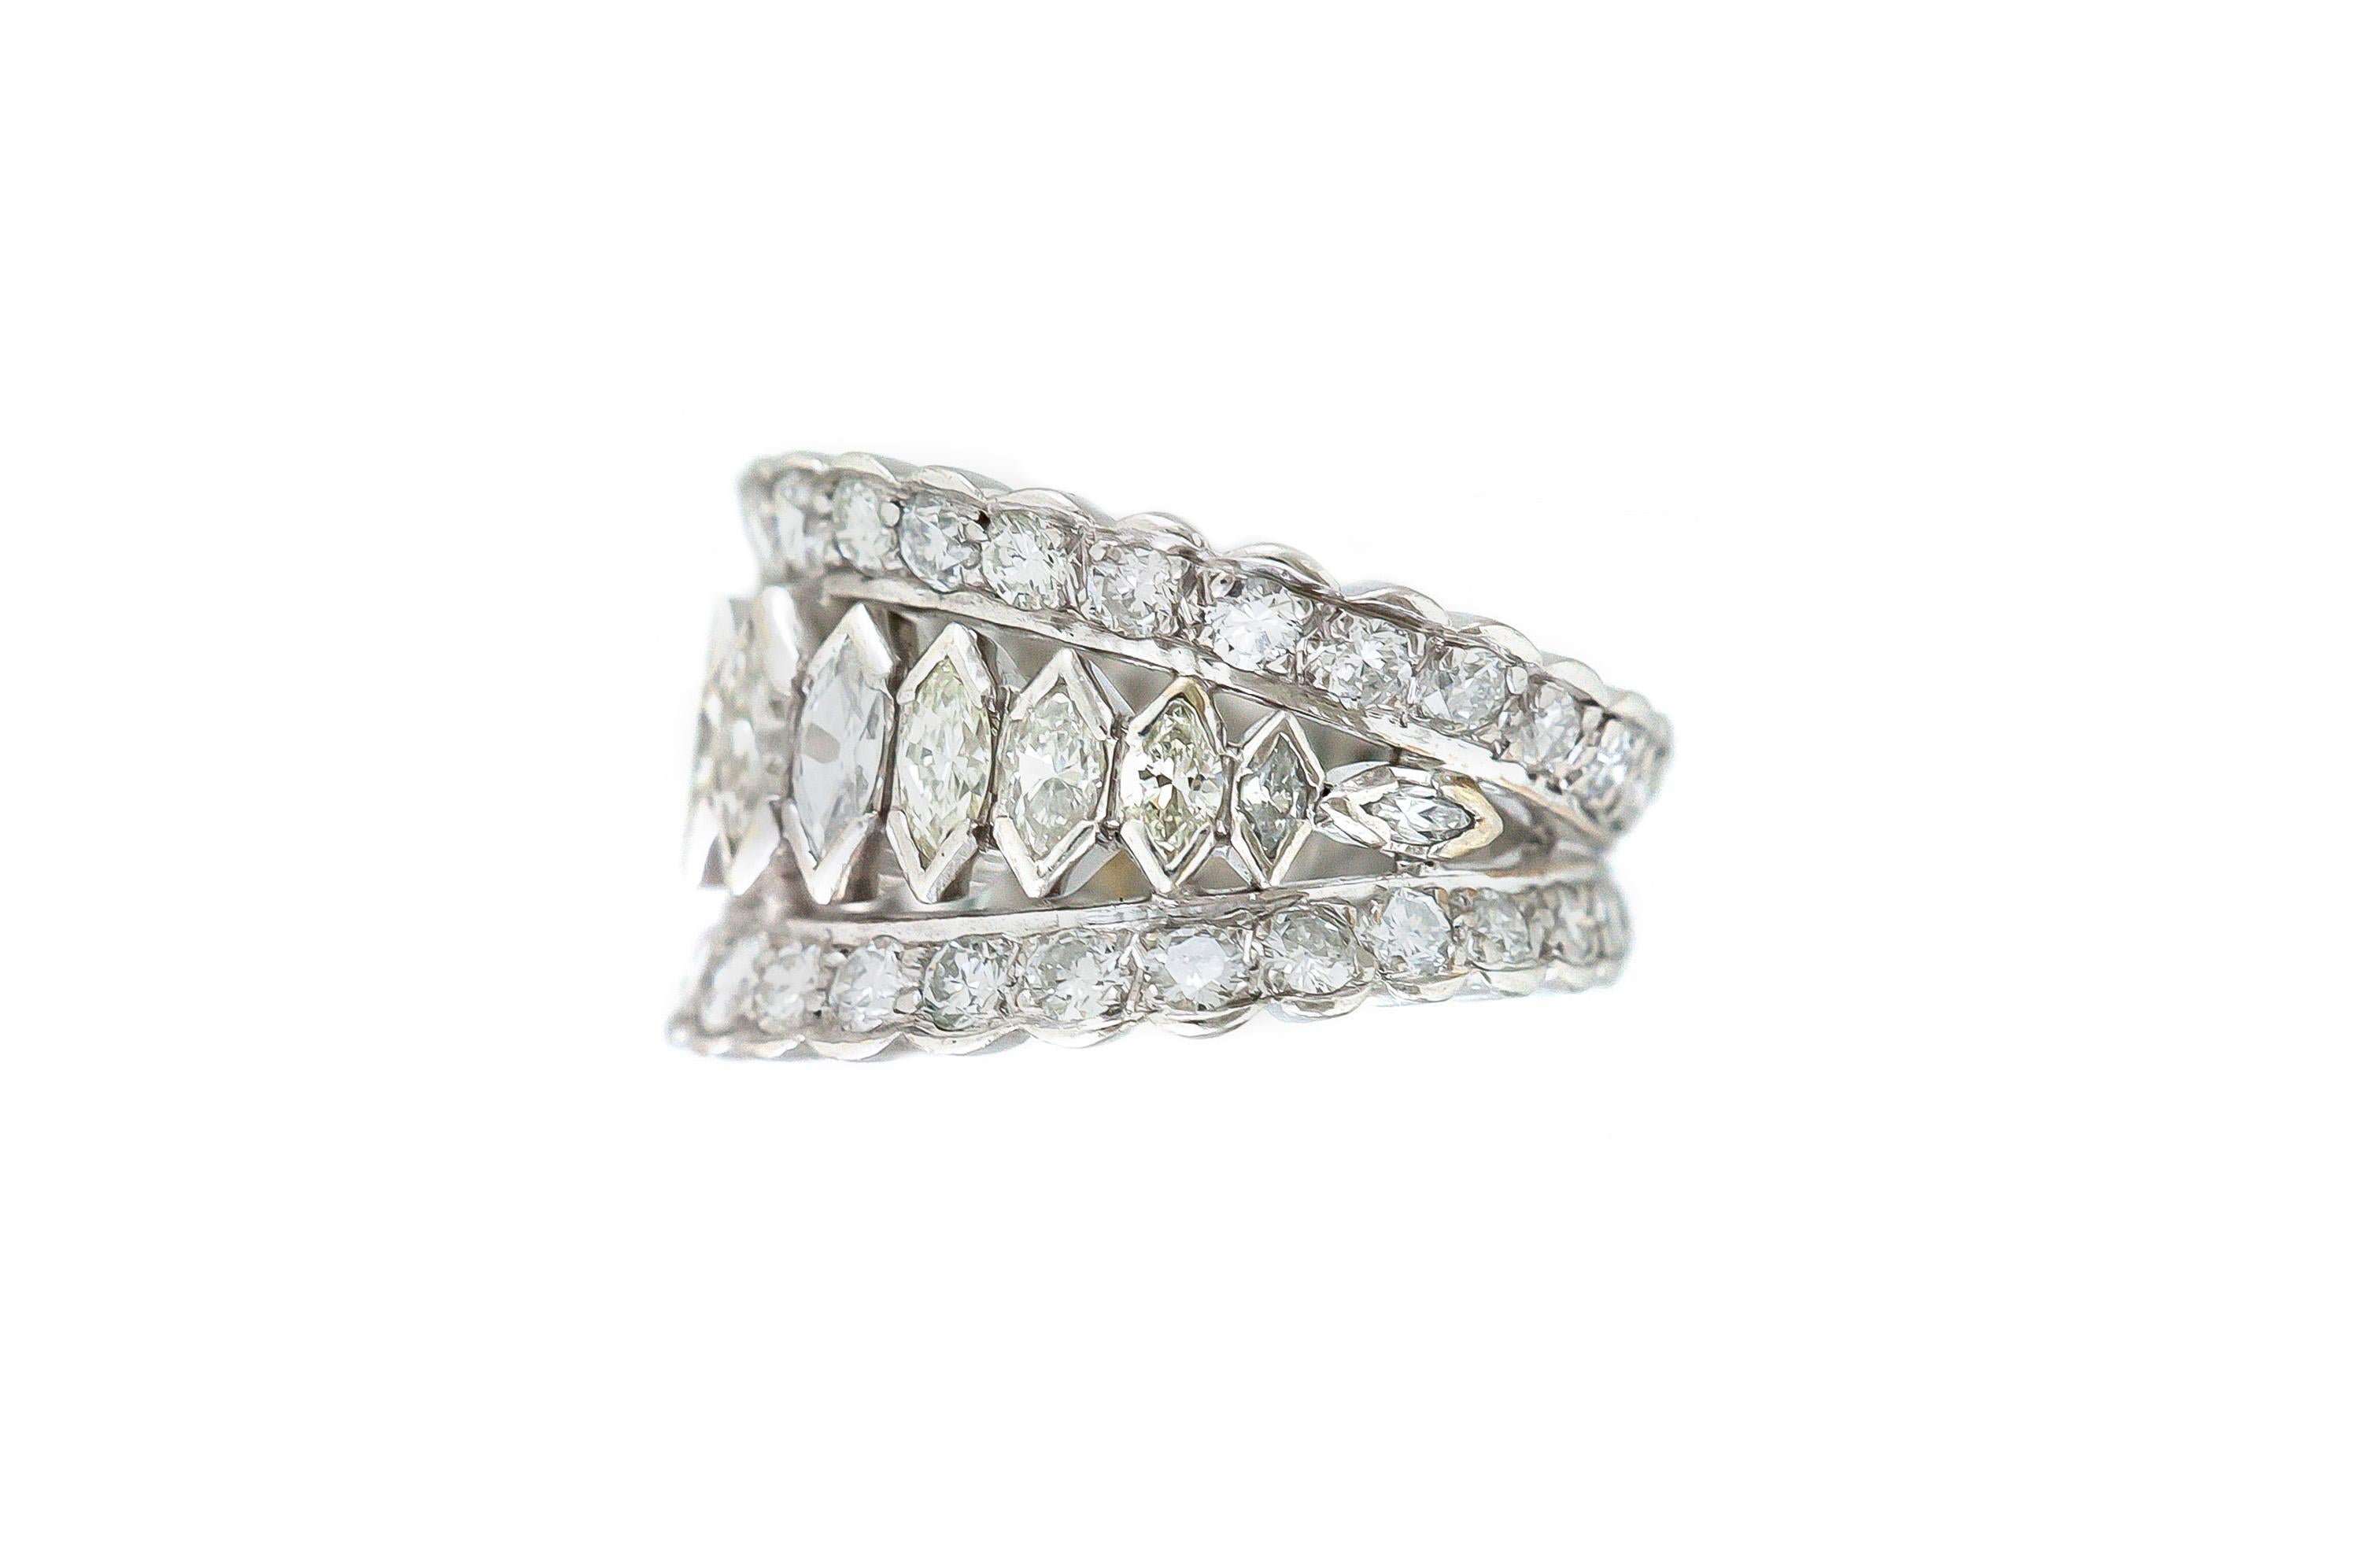 The ring is finely crafted in platinum with marquise and round cut diamonds weighing approximately total of 3.00 carat.
Carat 1950.
